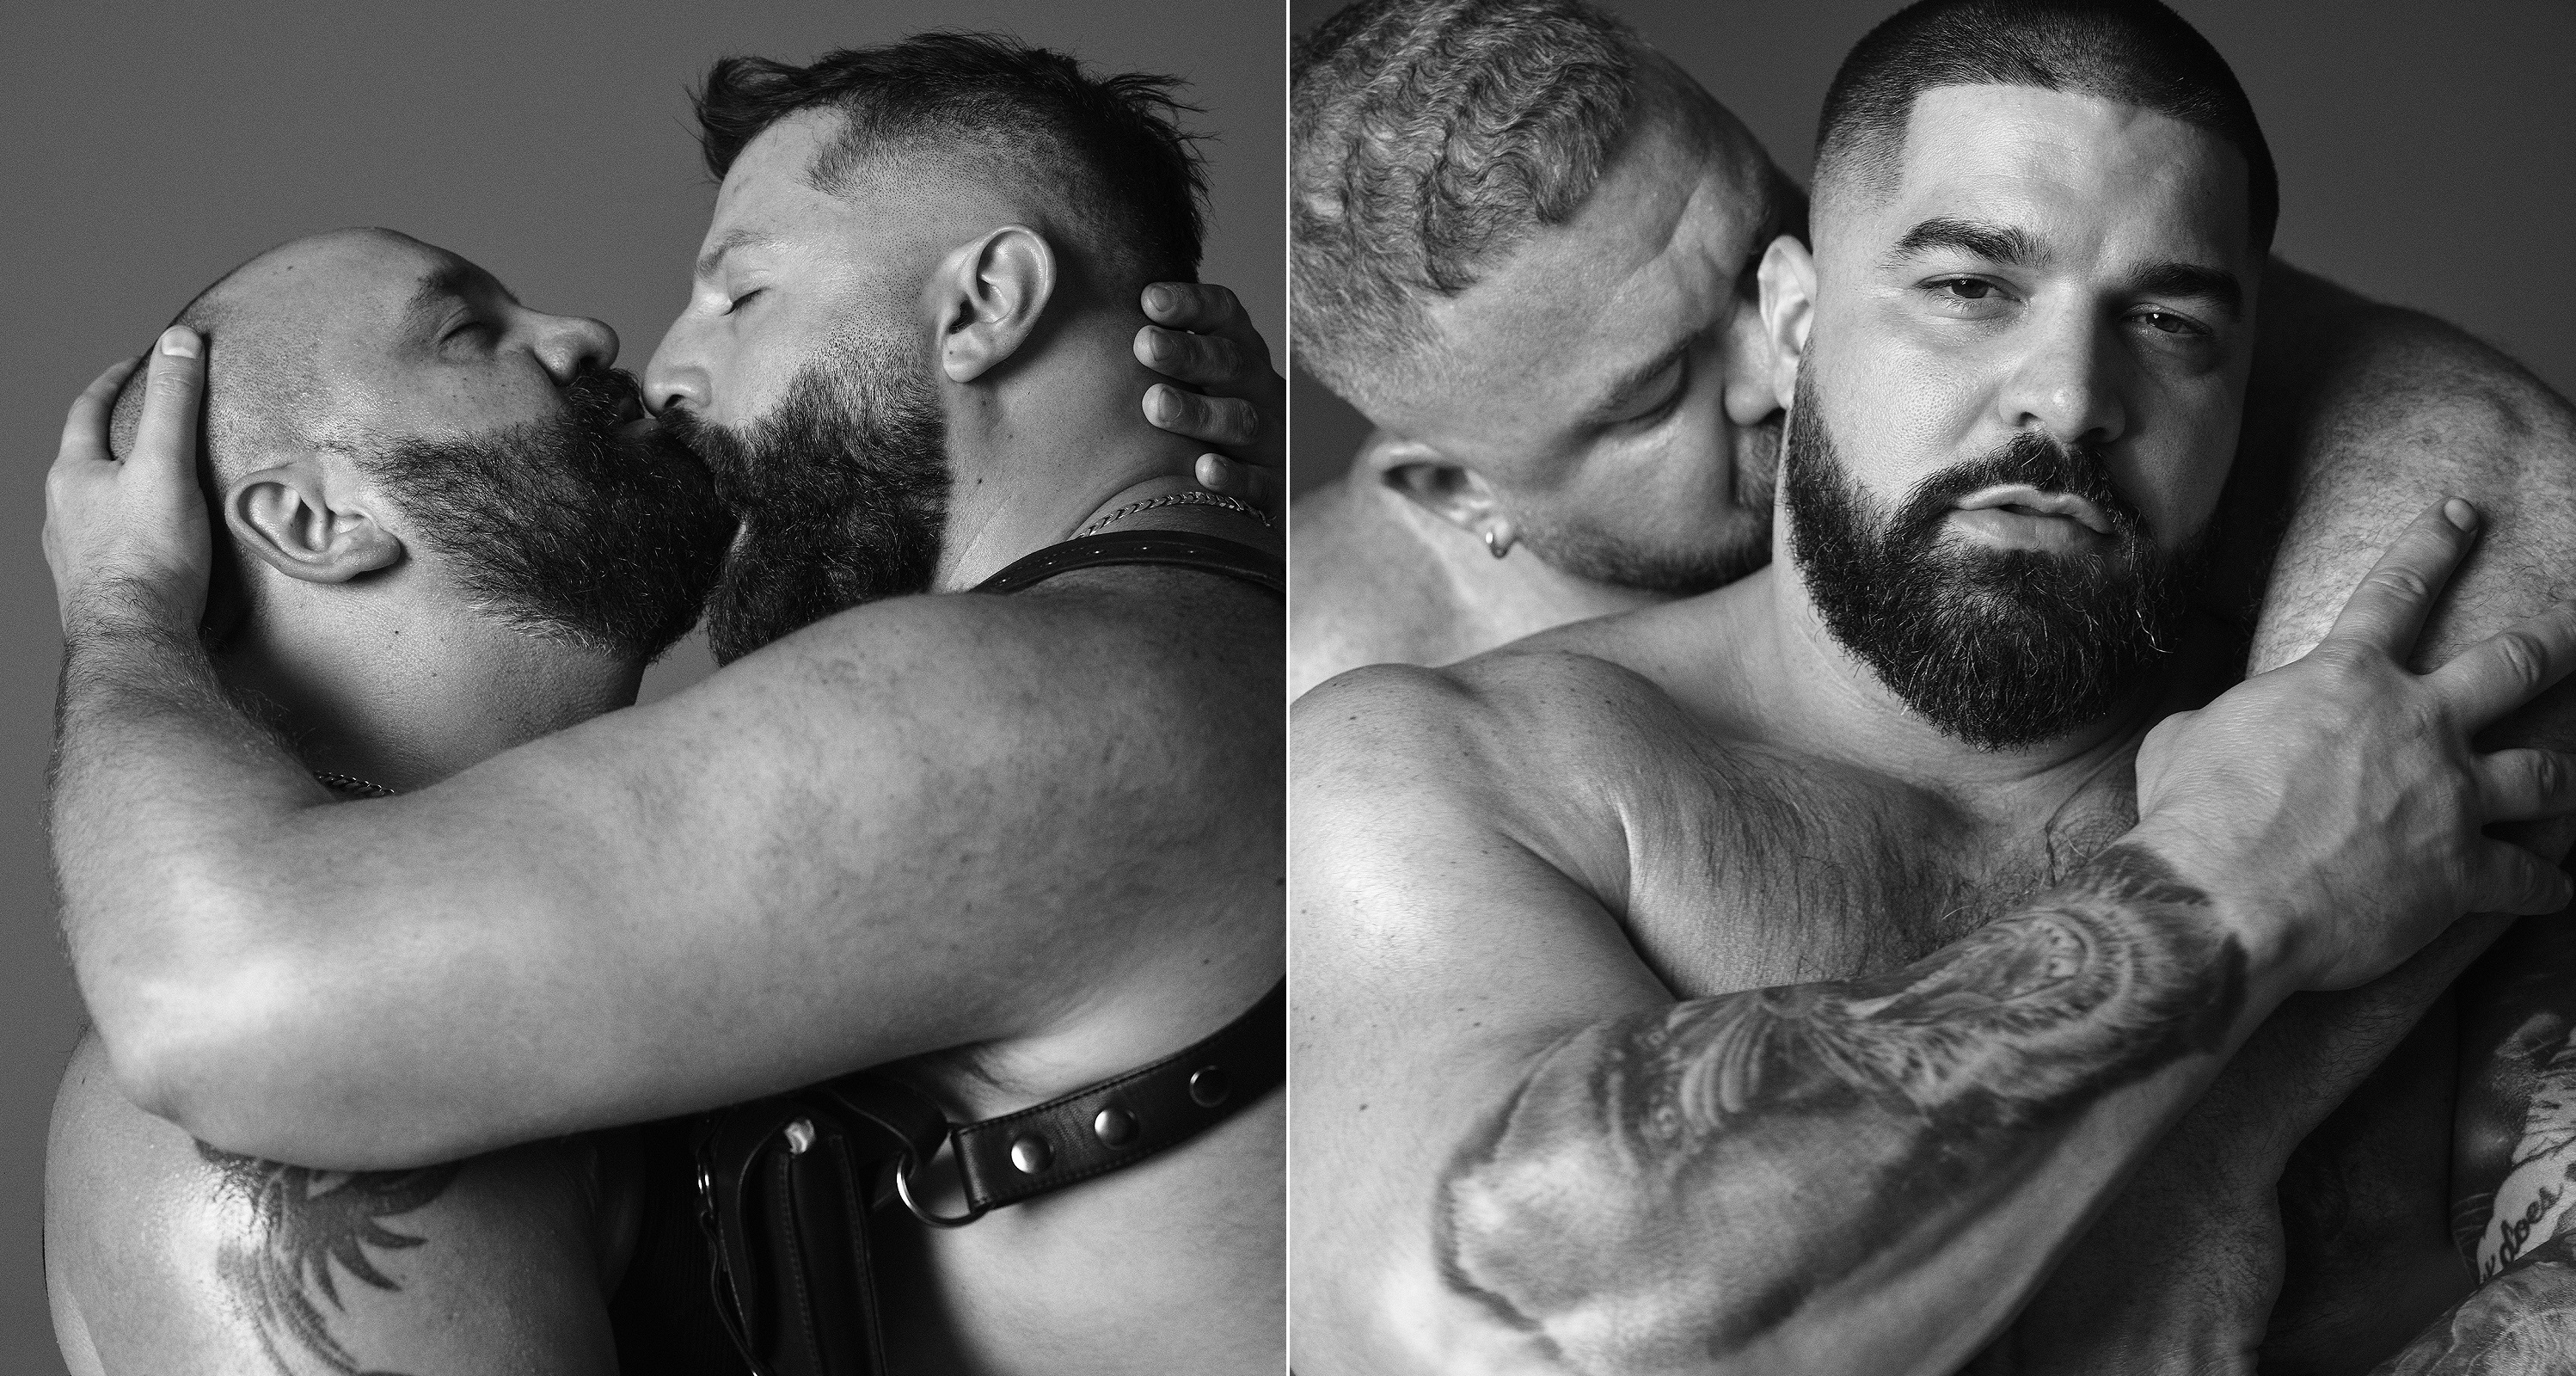 You can be a bigger size and still be sexy - Gay bears on body positivity and finding their tribe